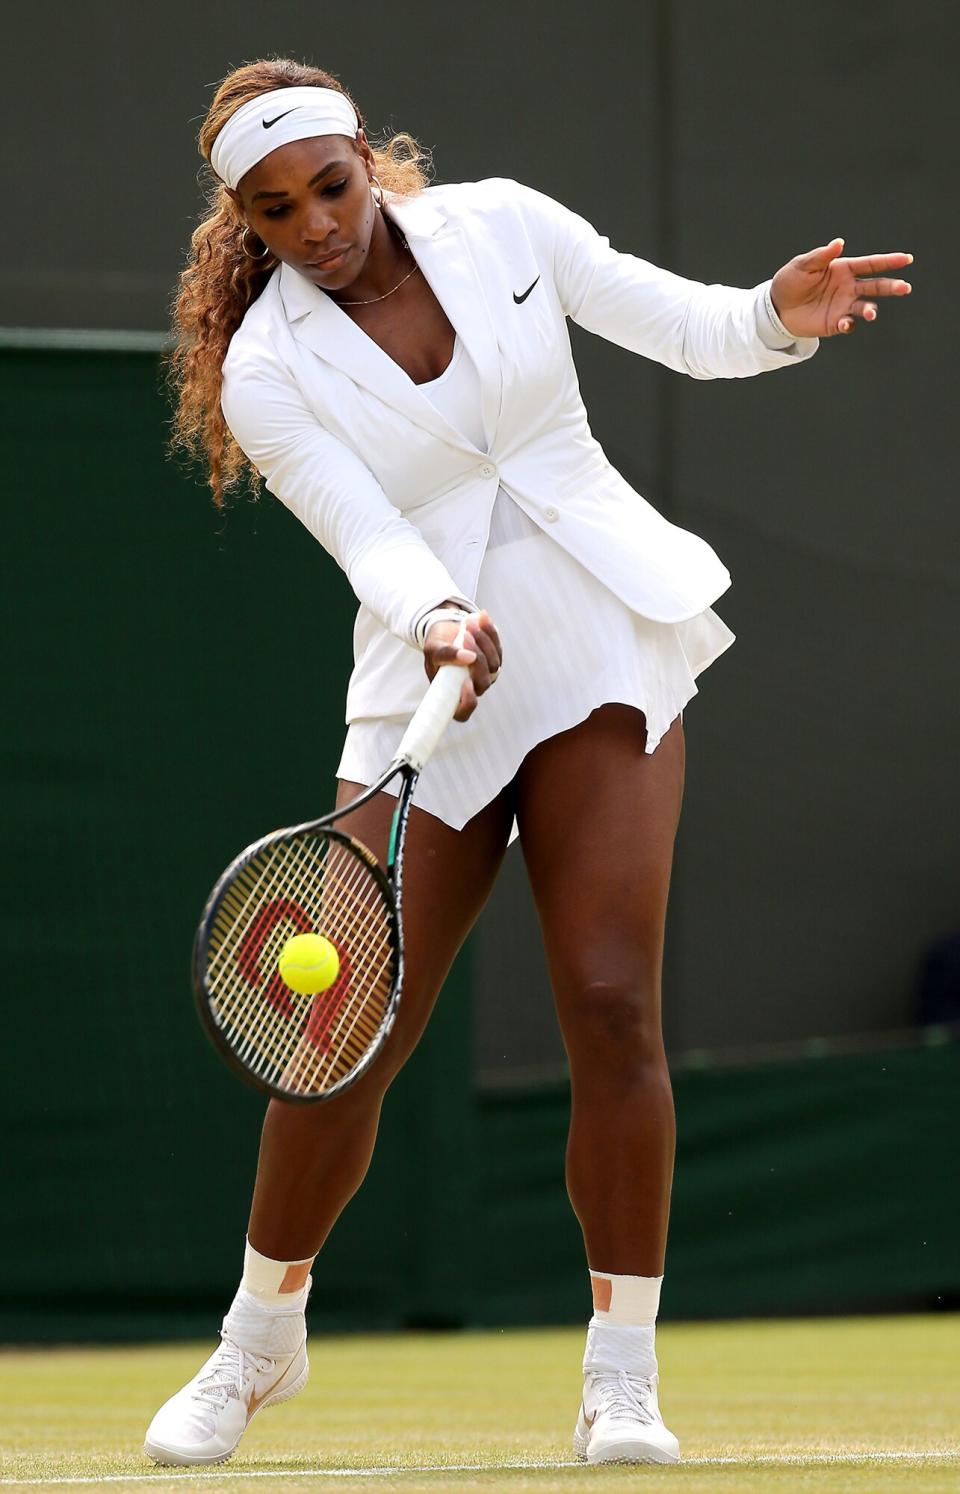 Serena Williams warms up before the start of her women's singles second round match against Russia's Chanelle Scheepers on day four of the 2014 Wimbledon Championships at The All England Tennis Club in Wimbledon, southwest London, on June 26, 2014